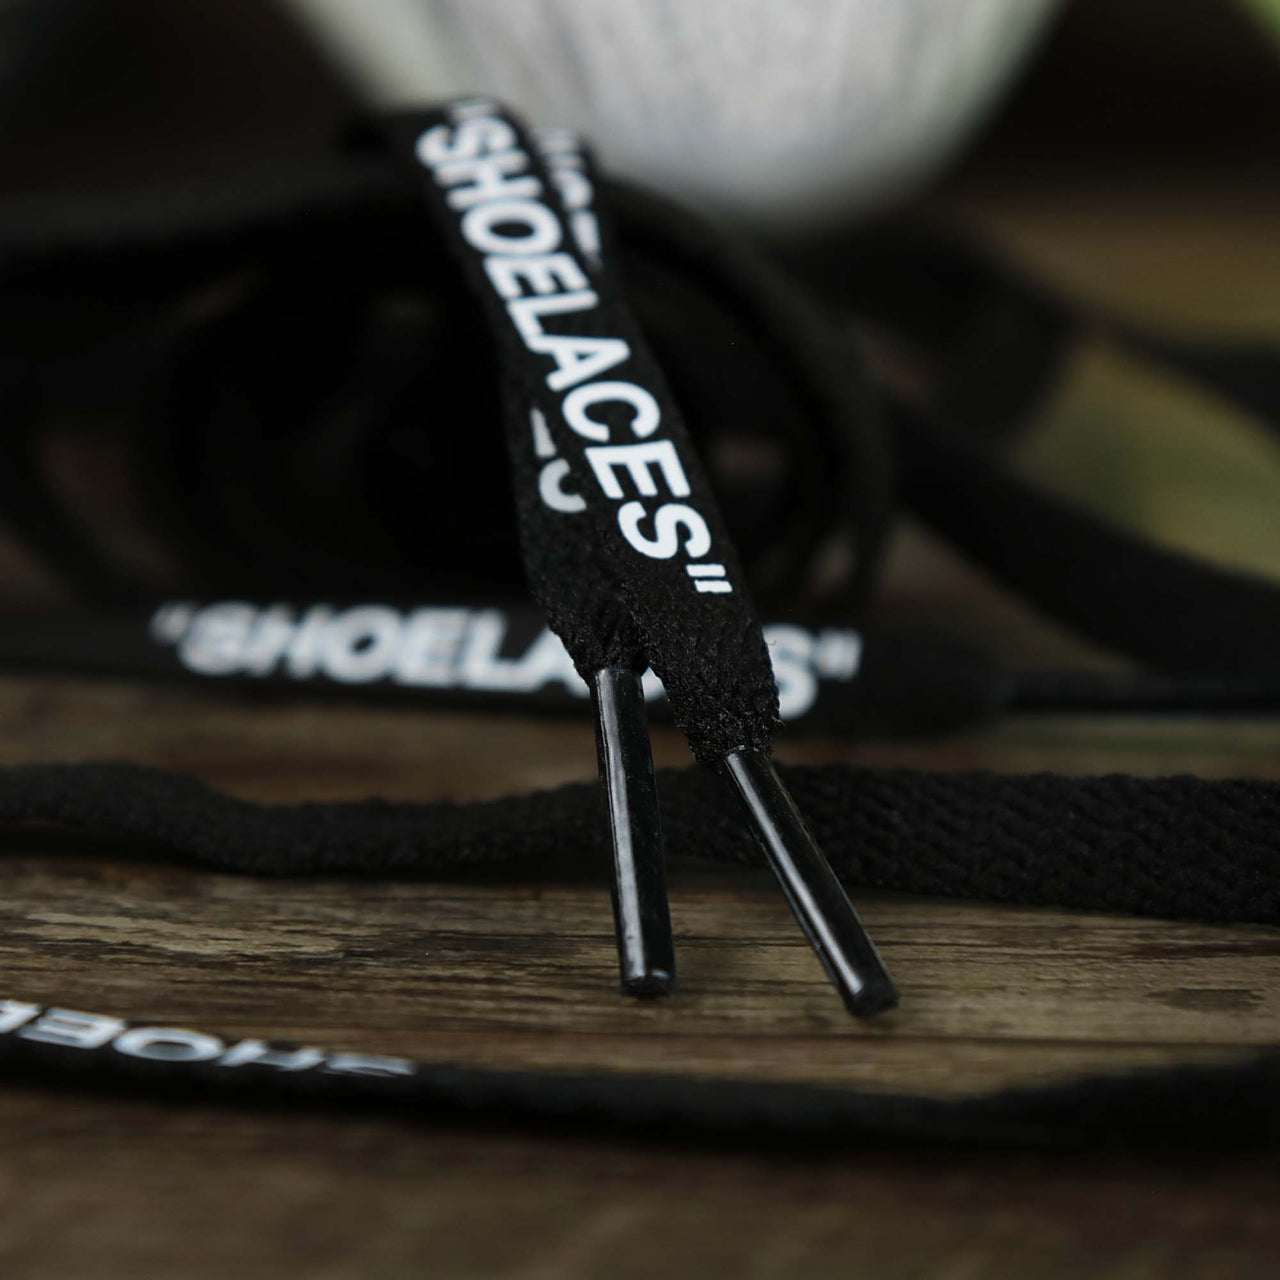 The Black Agkets on the Flat Black Shoelaces with “Shoelaces” Print | 120cm Capswag